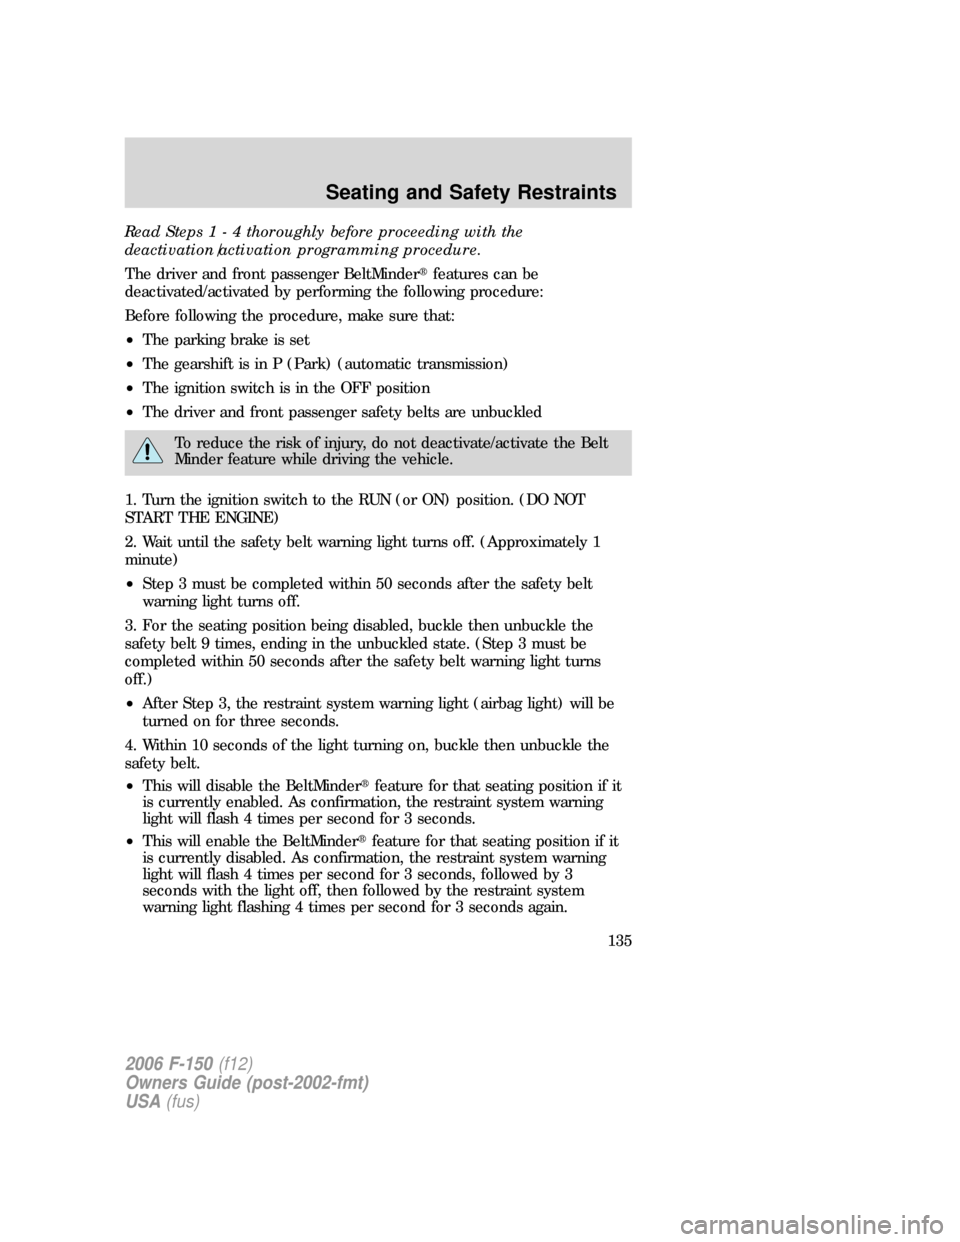 FORD F150 2006 11.G Owners Manual Read Steps1-4thoroughly before proceeding with the
deactivation/activation programming procedure.
The driver and front passenger BeltMinderfeatures can be
deactivated/activated by performing the foll